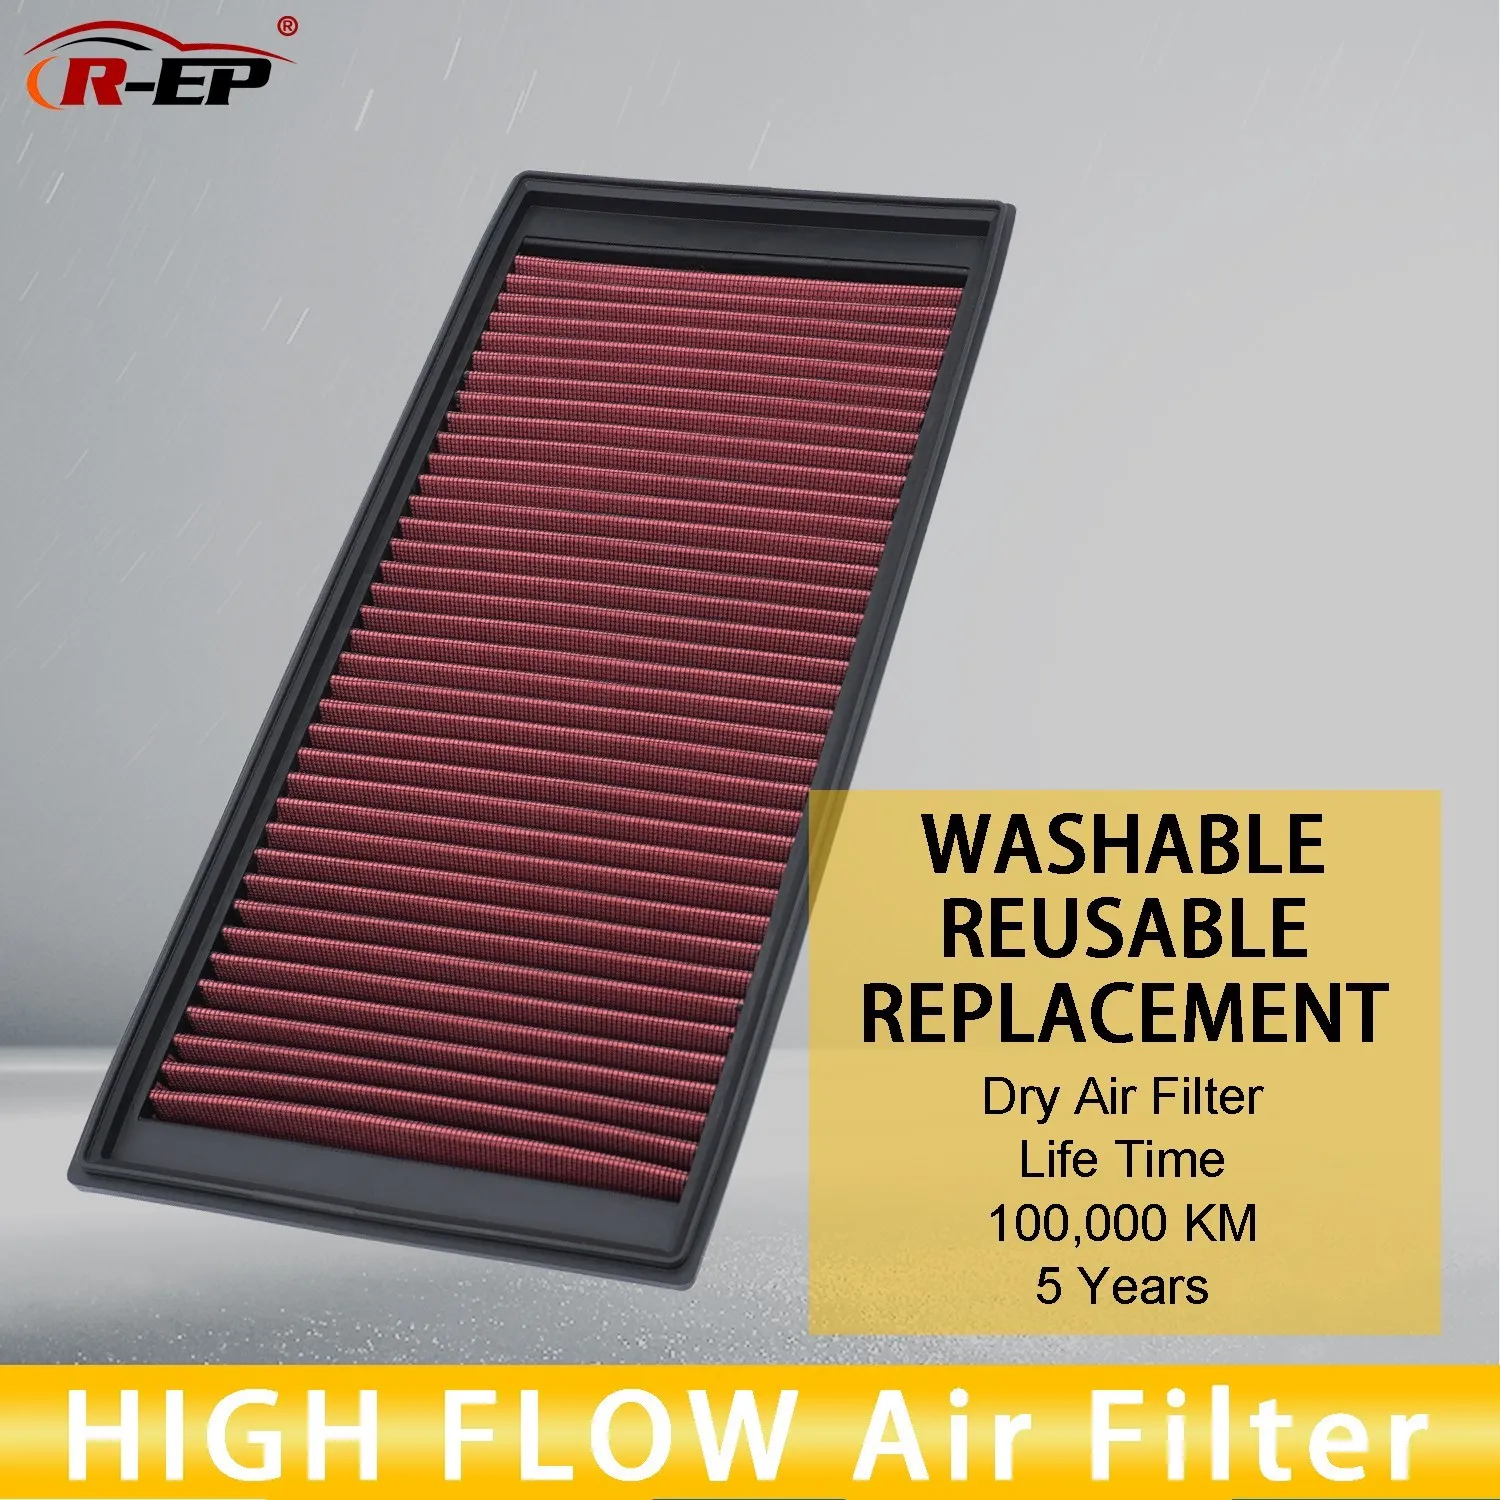 R ep high flow air filter fits for vw golf iv gti bora beetle jetta seat thumb200